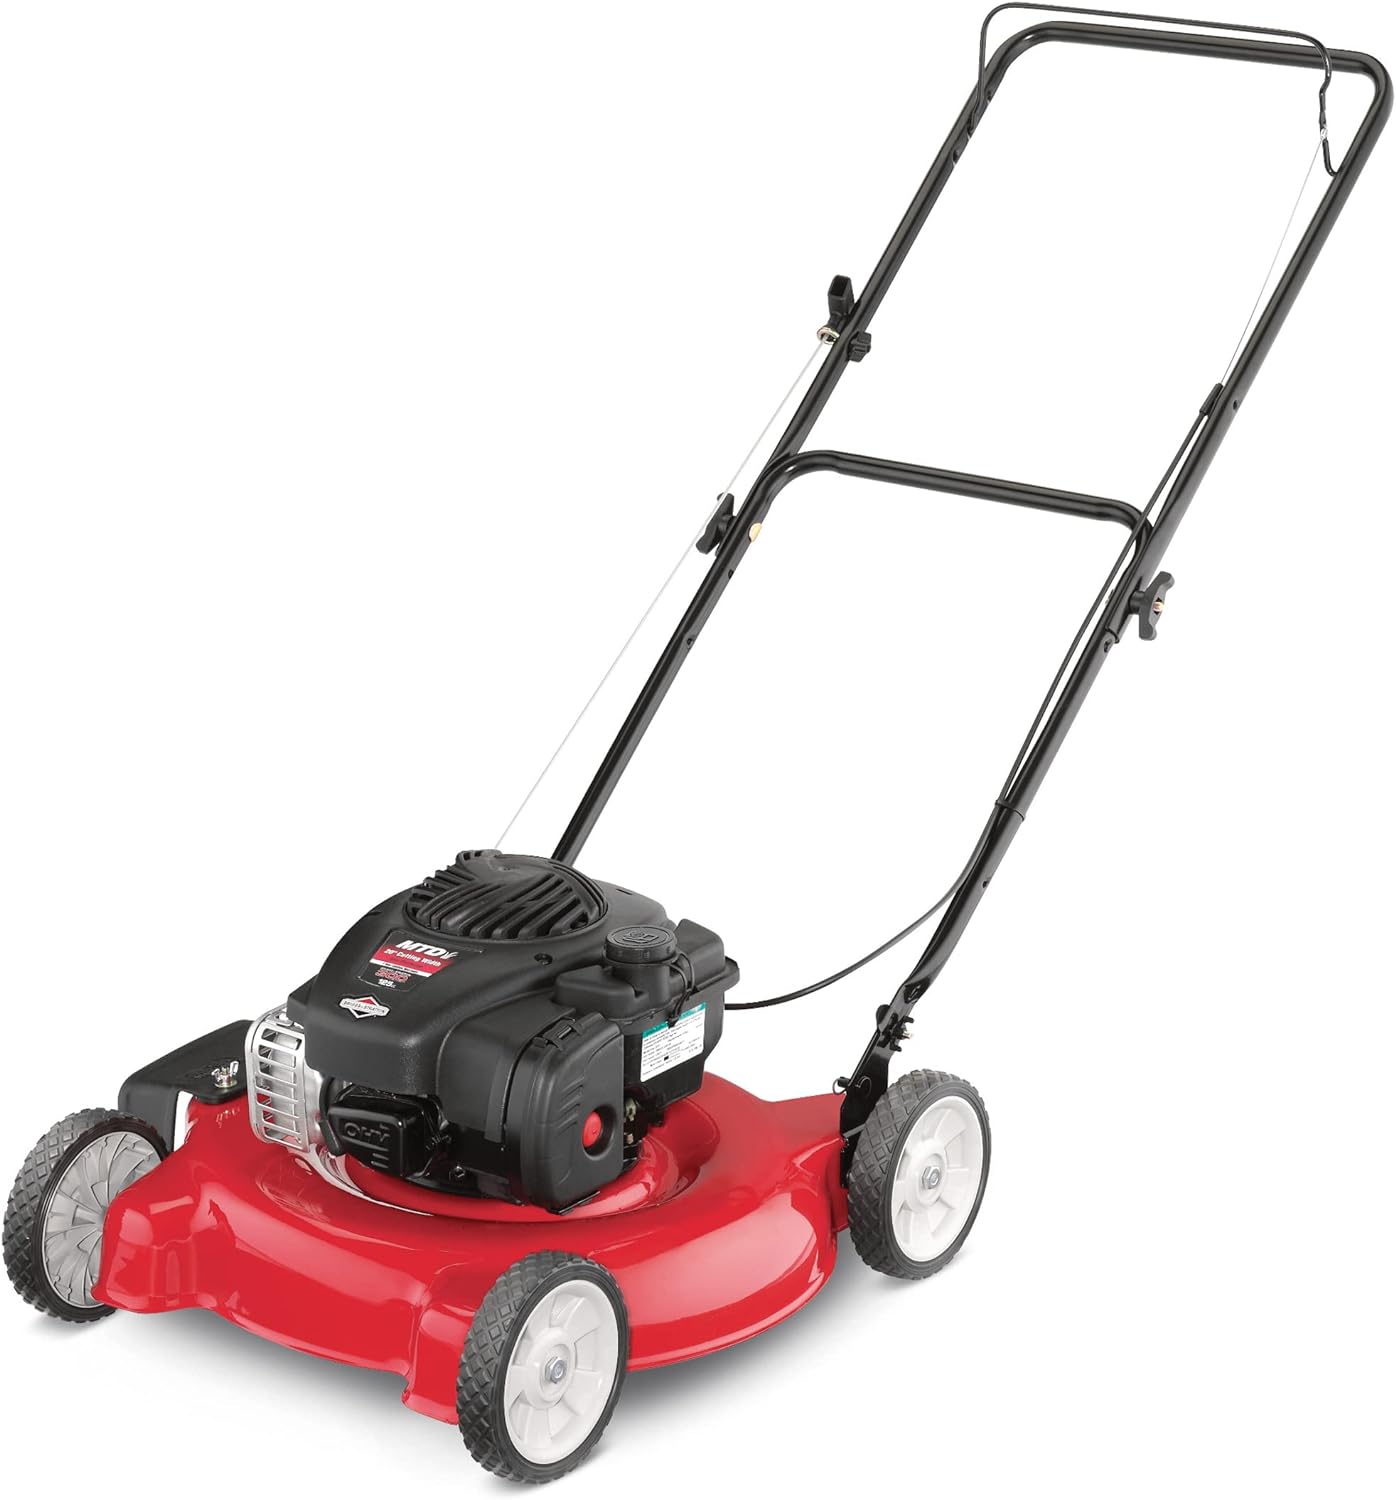 20-in Push Lawn Mower with 125cc Gas Powered Engine, Black and Red - $160